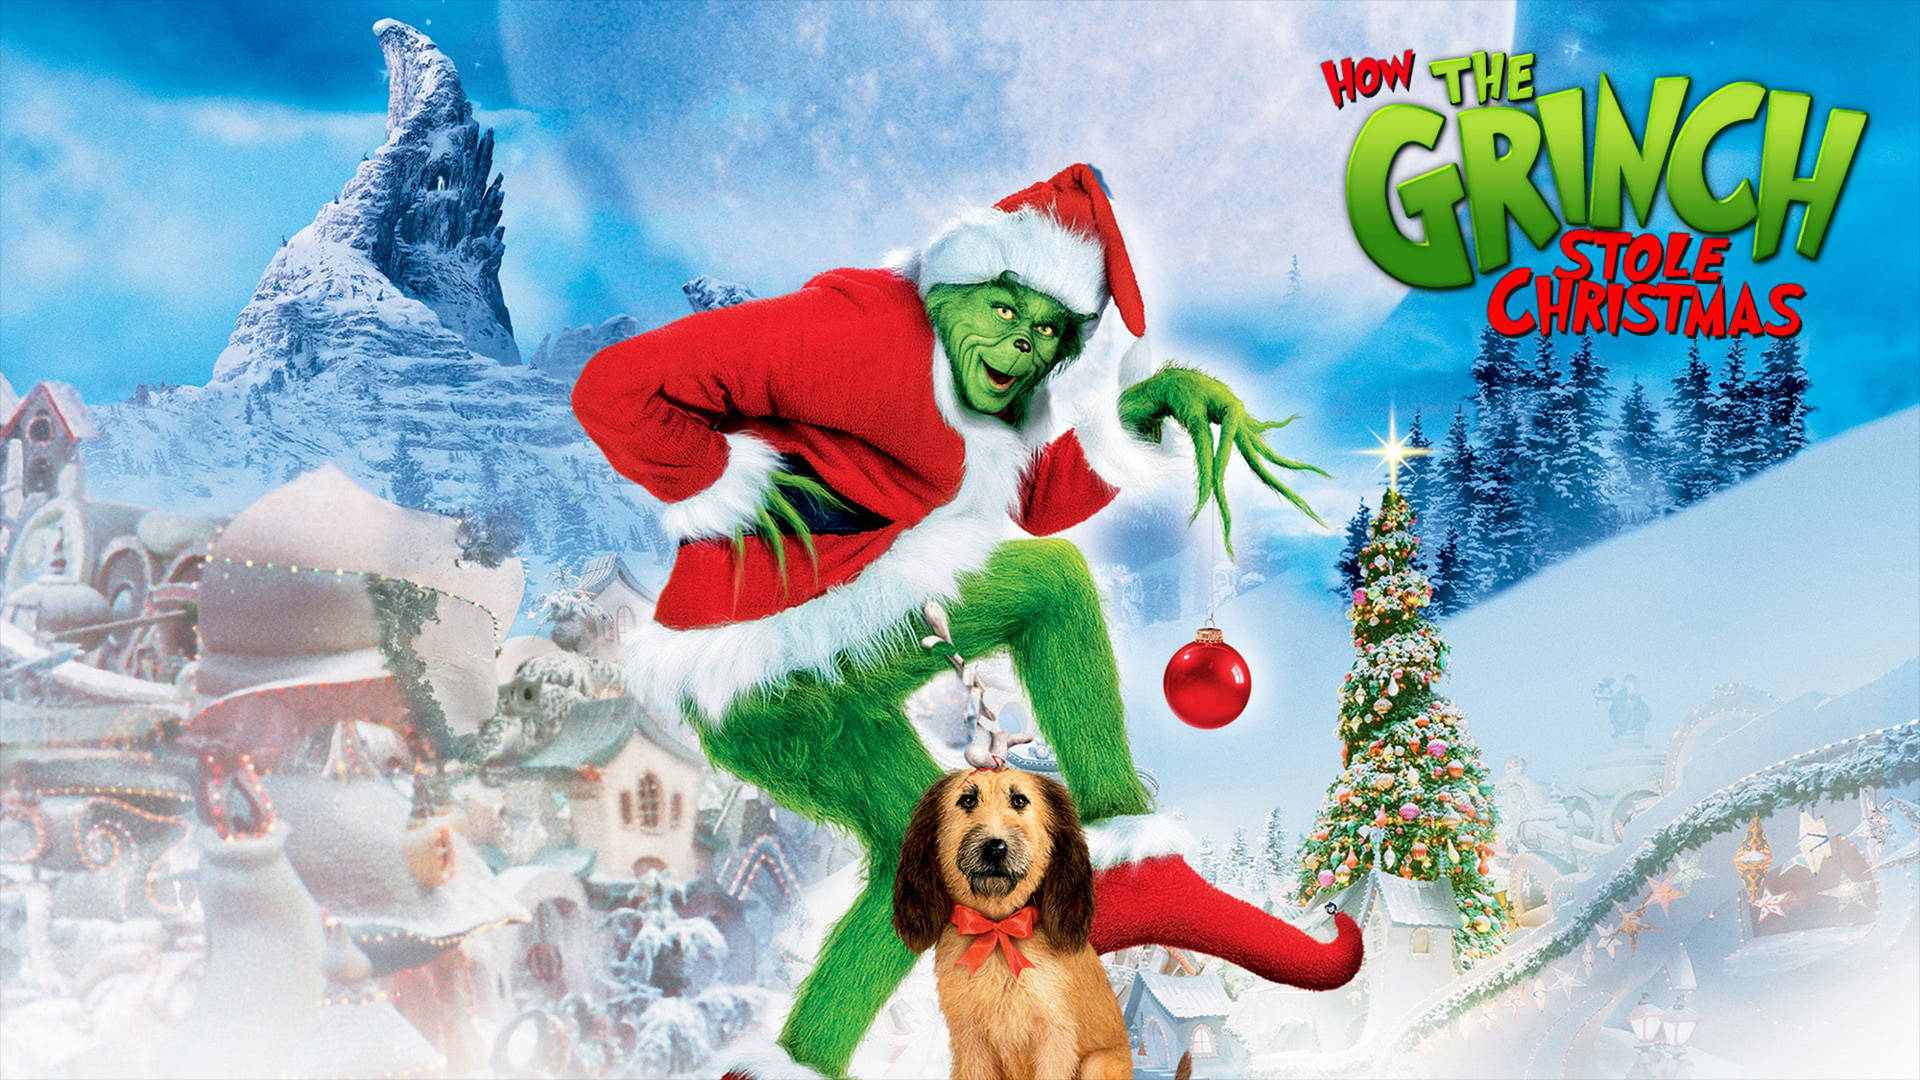 The Grinch Movie Poster Wallpaper